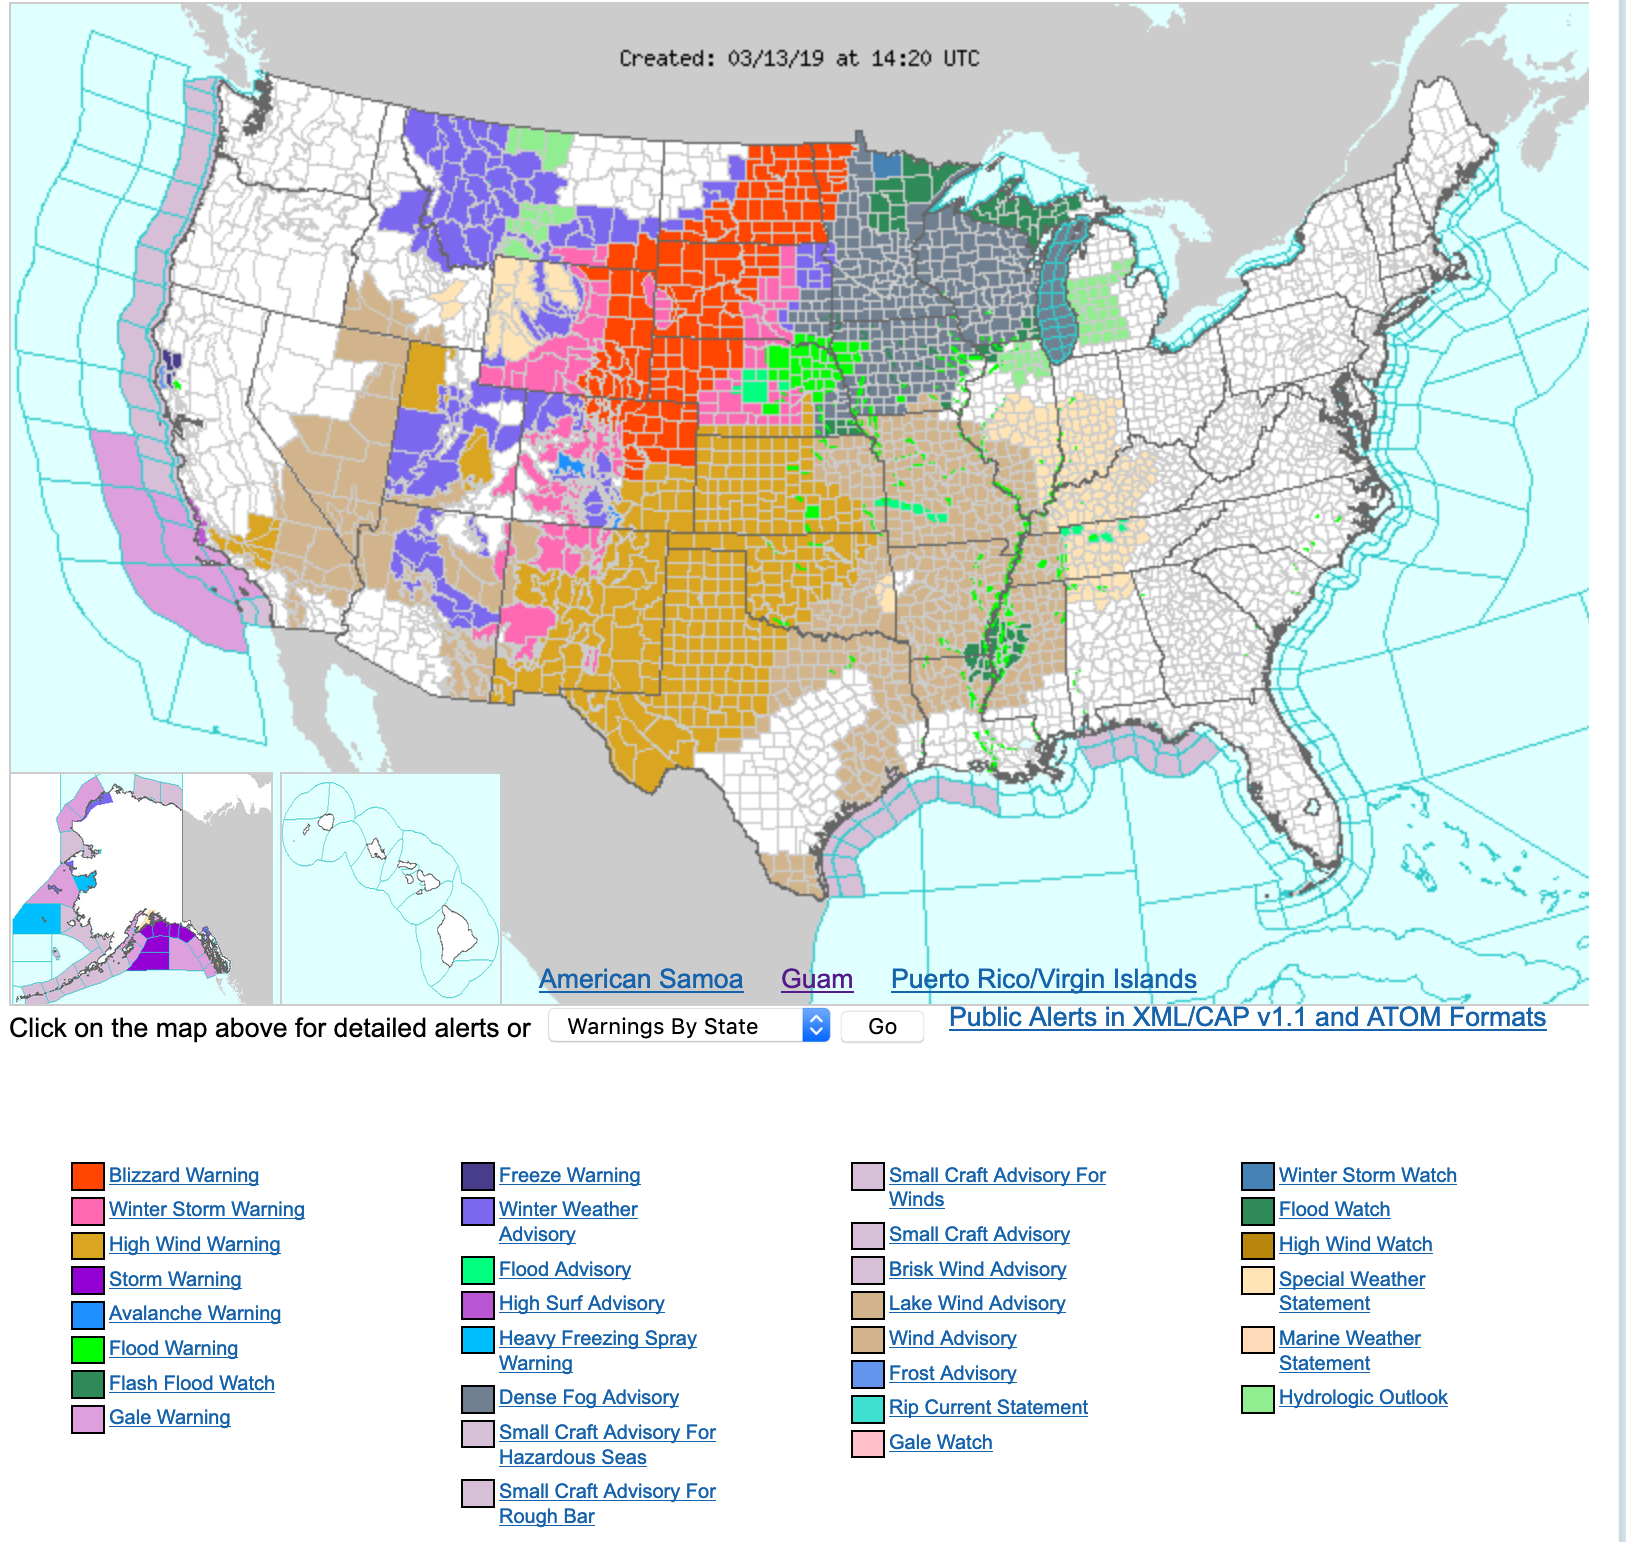 Map of NWS warnings and advisories at 14 UTC [click to enlarge]